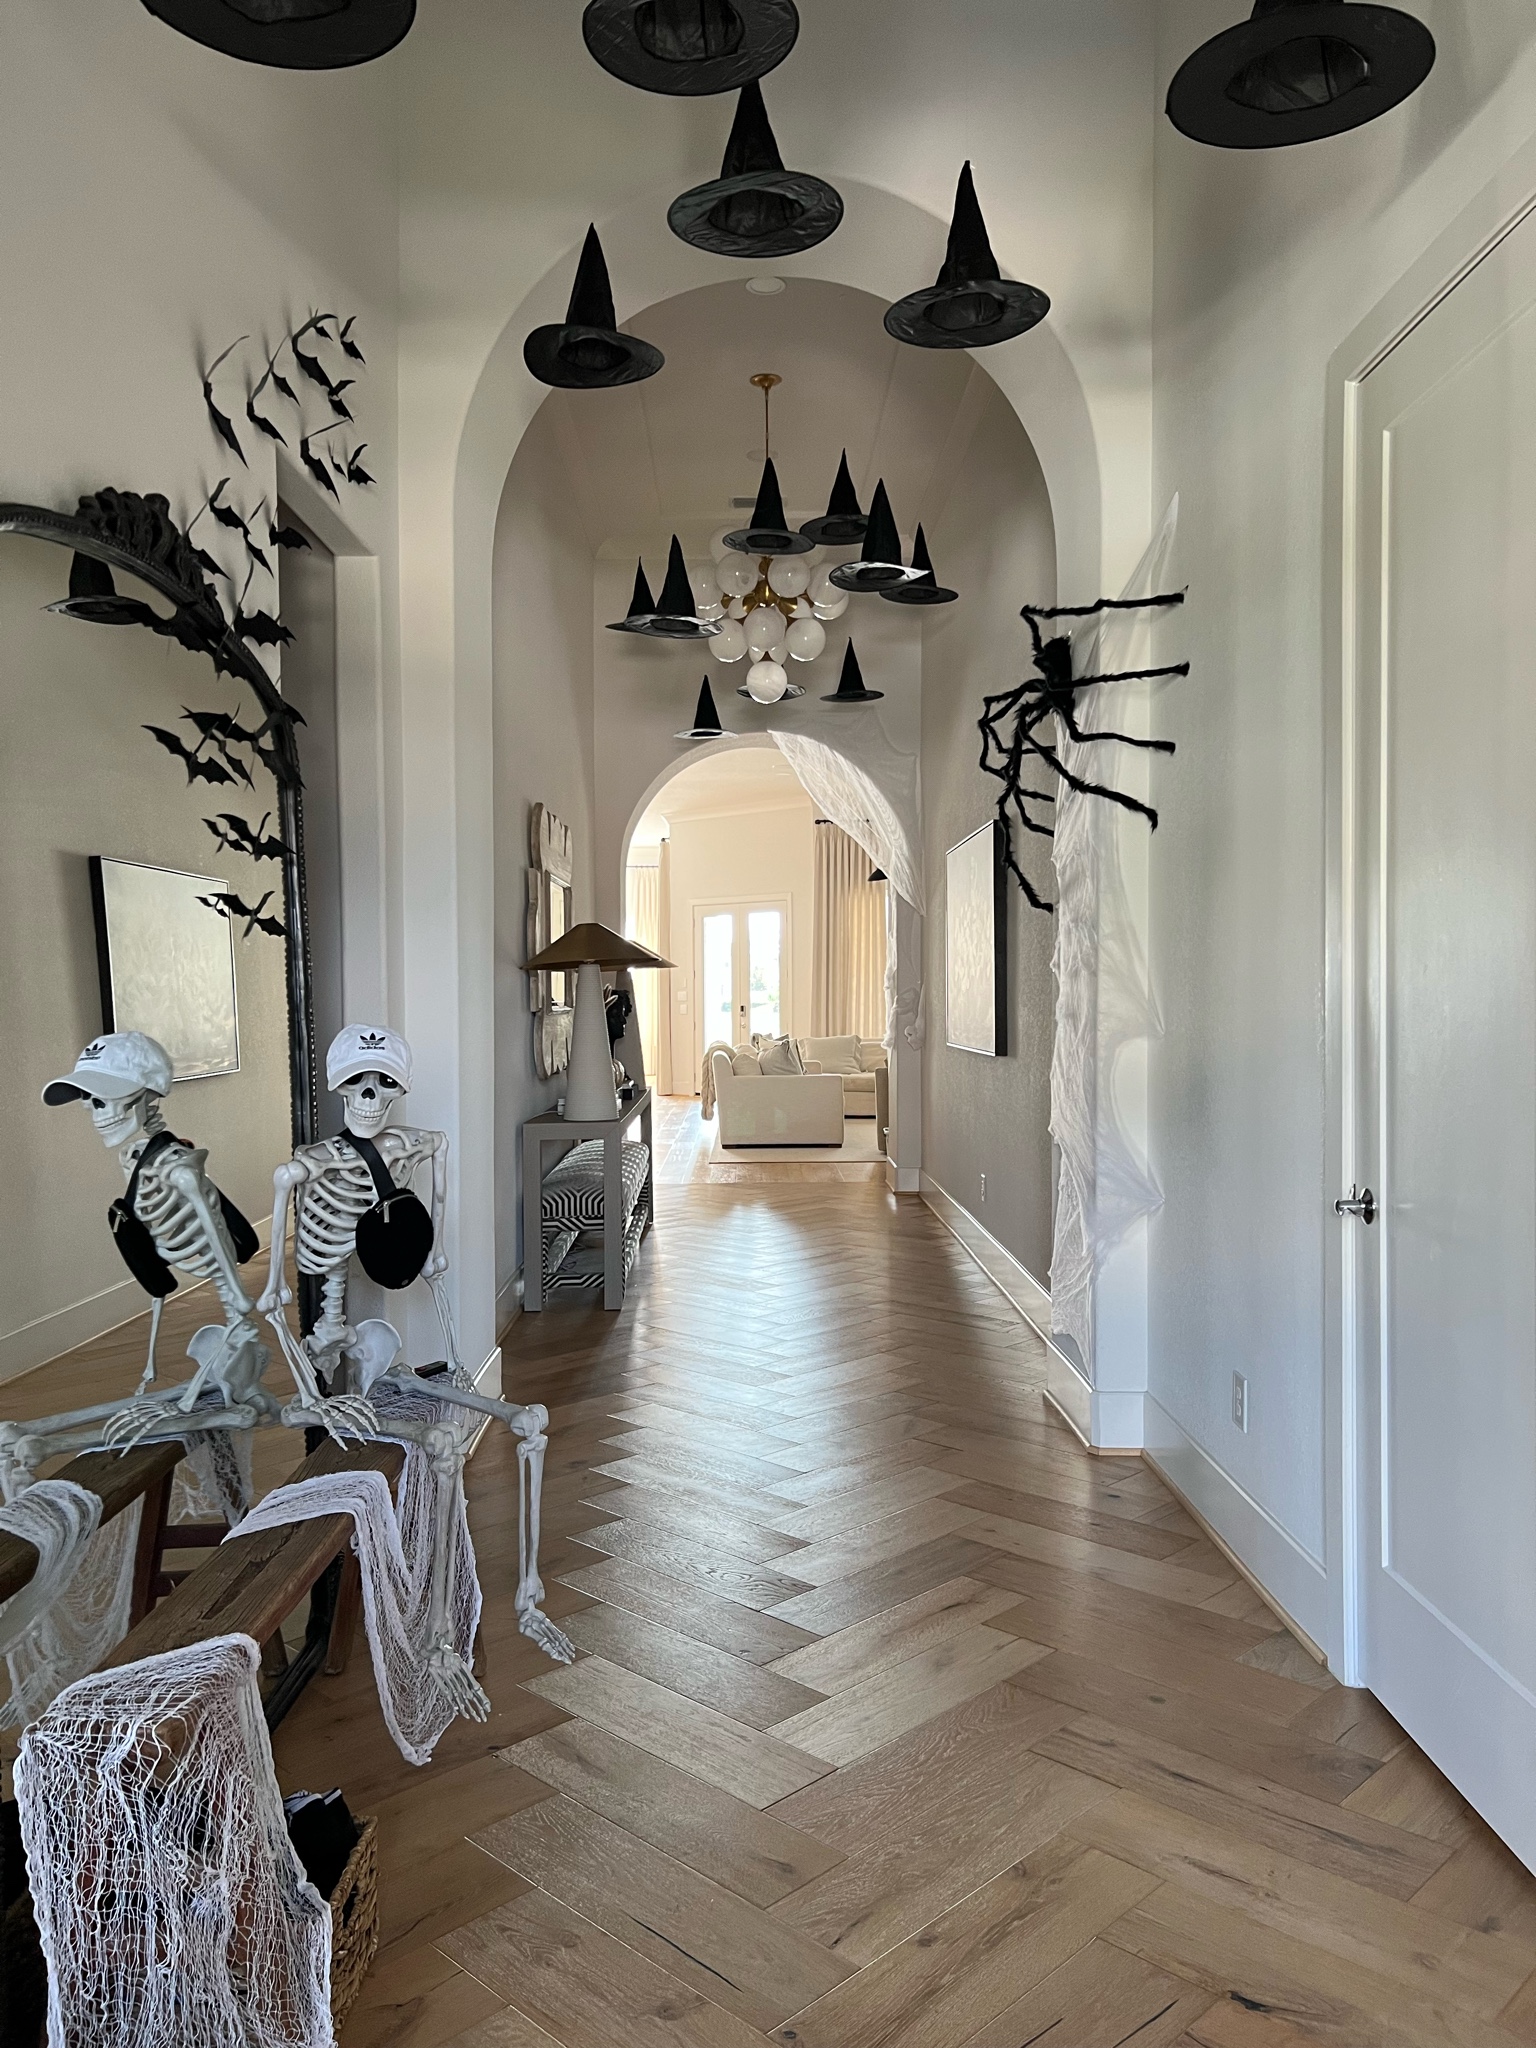 Loving the Halloween Bat decor trend? Check out the best 10 ways you can add flying bat decor to your Halloween set up this year!